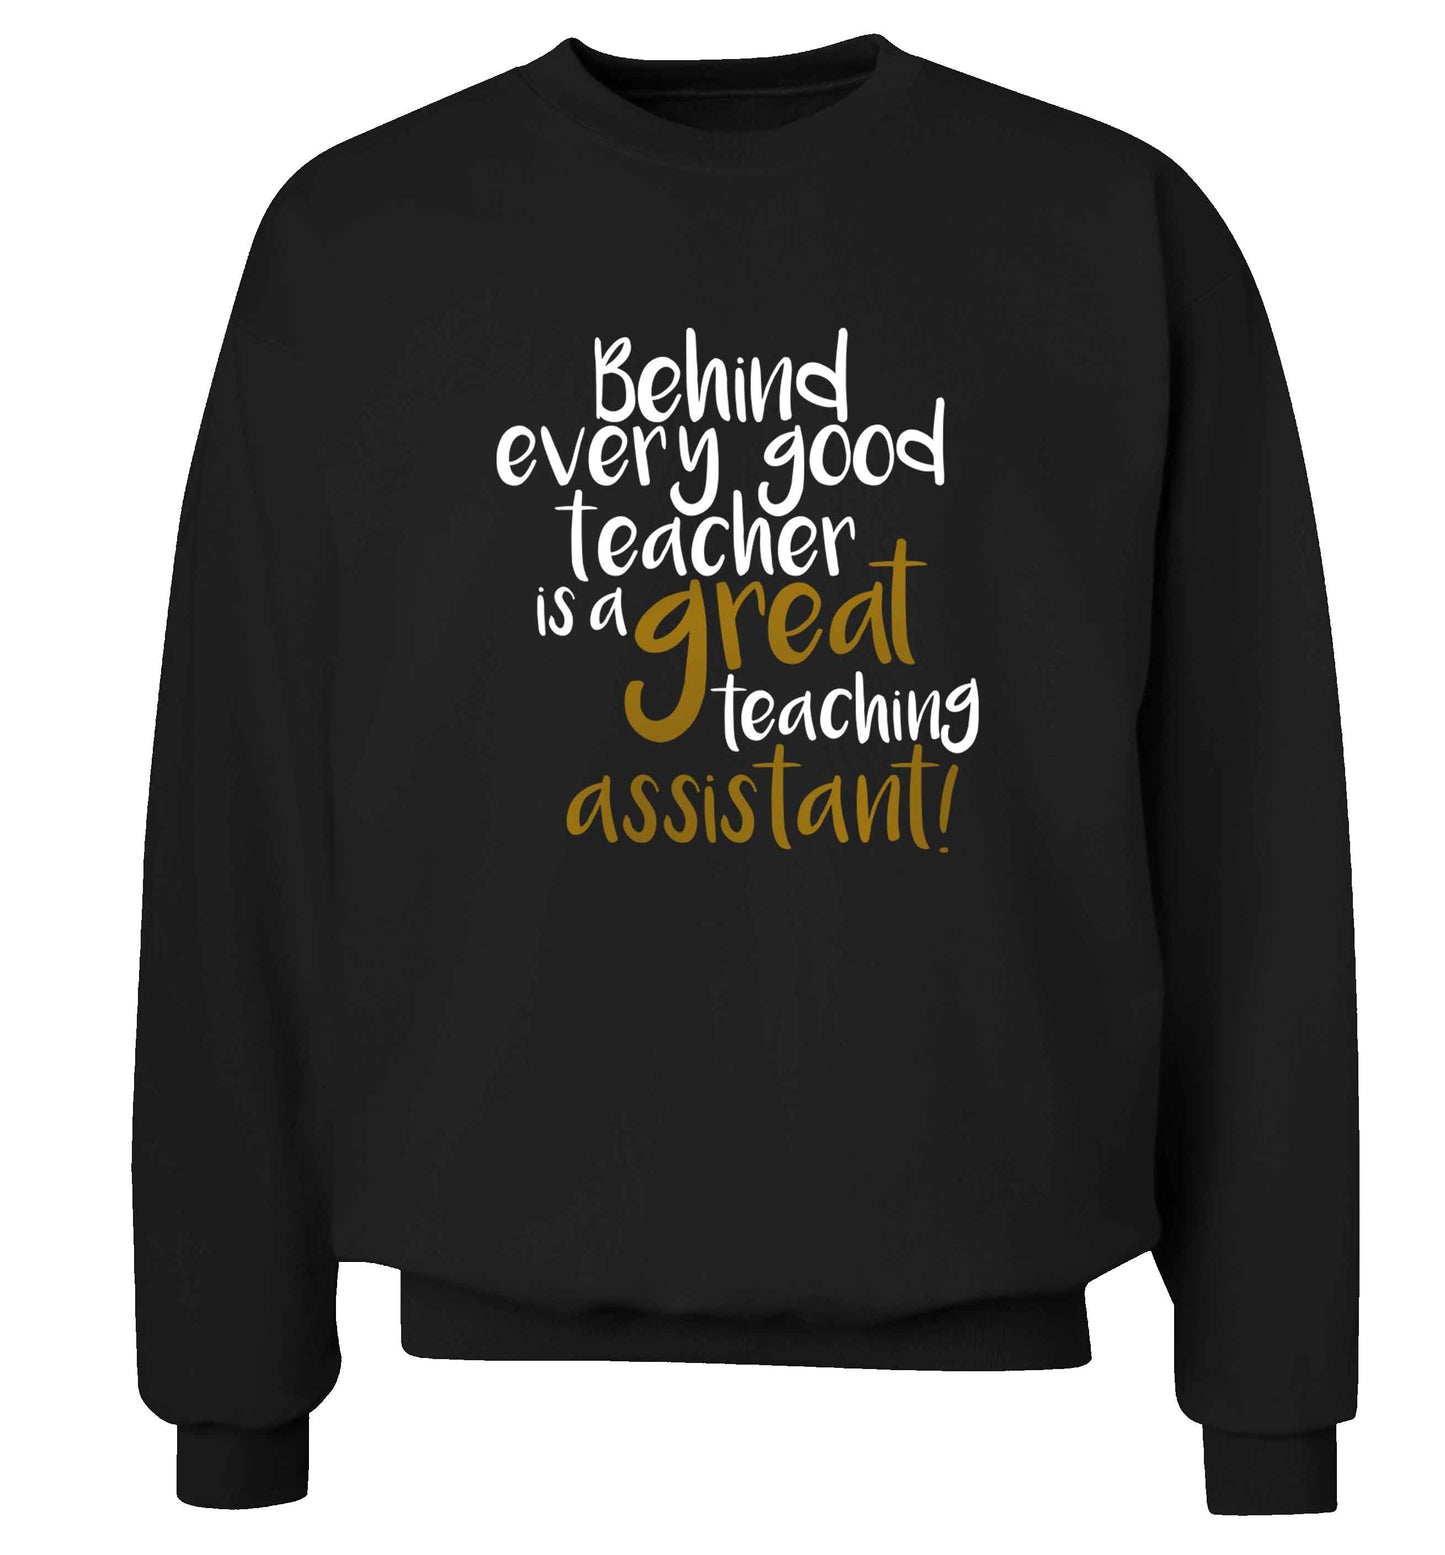 Behind every good teacher is a great teaching assistant adult's unisex black sweater 2XL